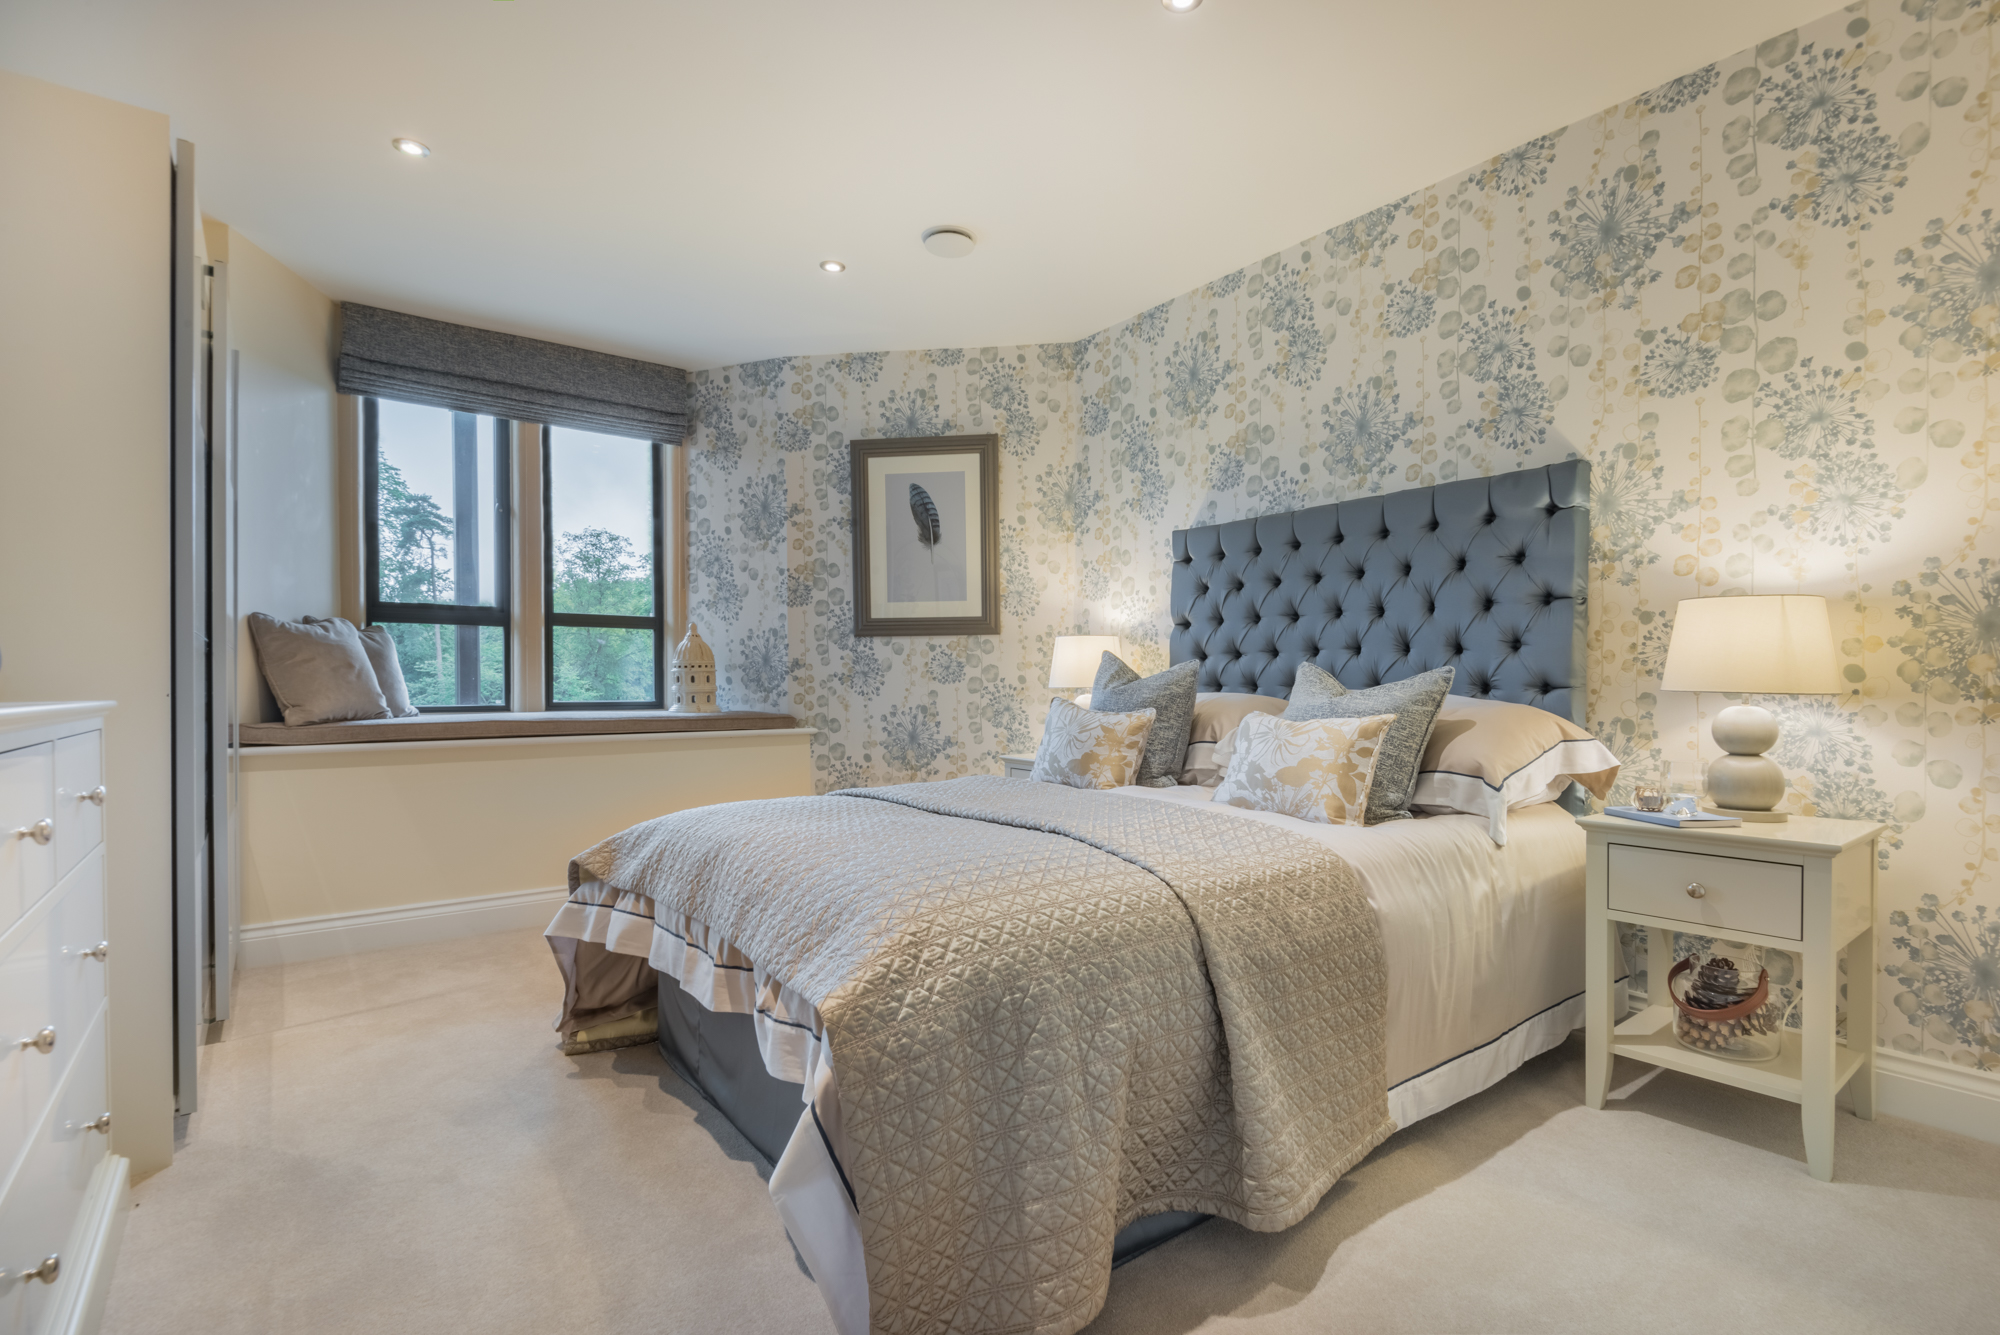 Yorkshire bedroom styling by Alexander Gibson Estate Agents